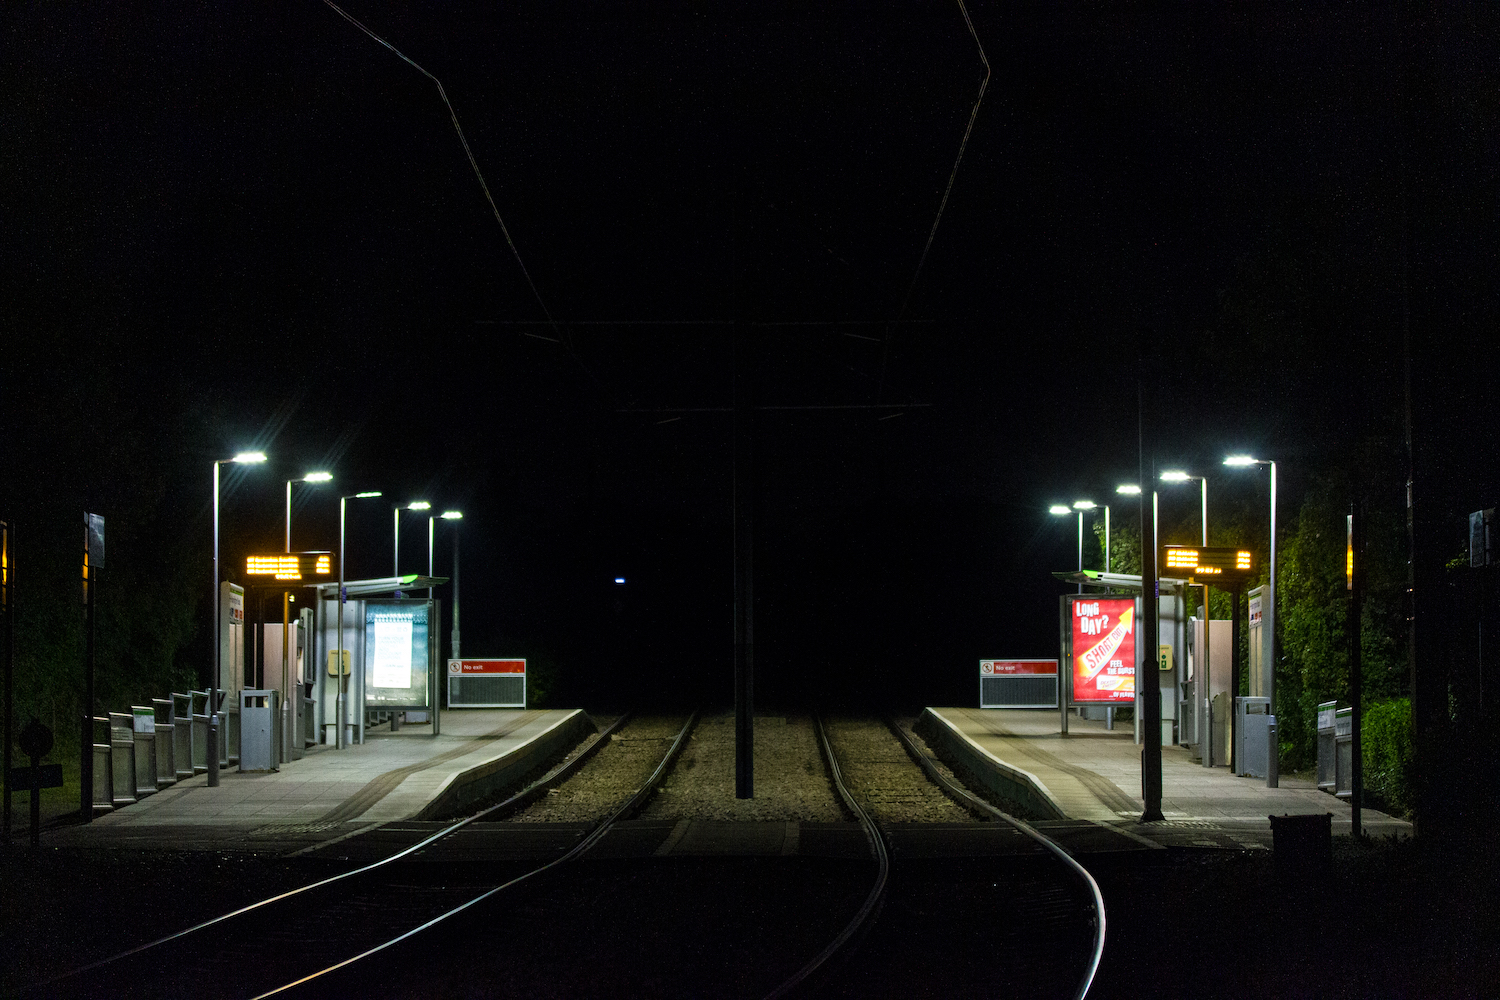 Professional Photography Dark Tram Stop At Midnight With Tracks And Platform In South Norwood London